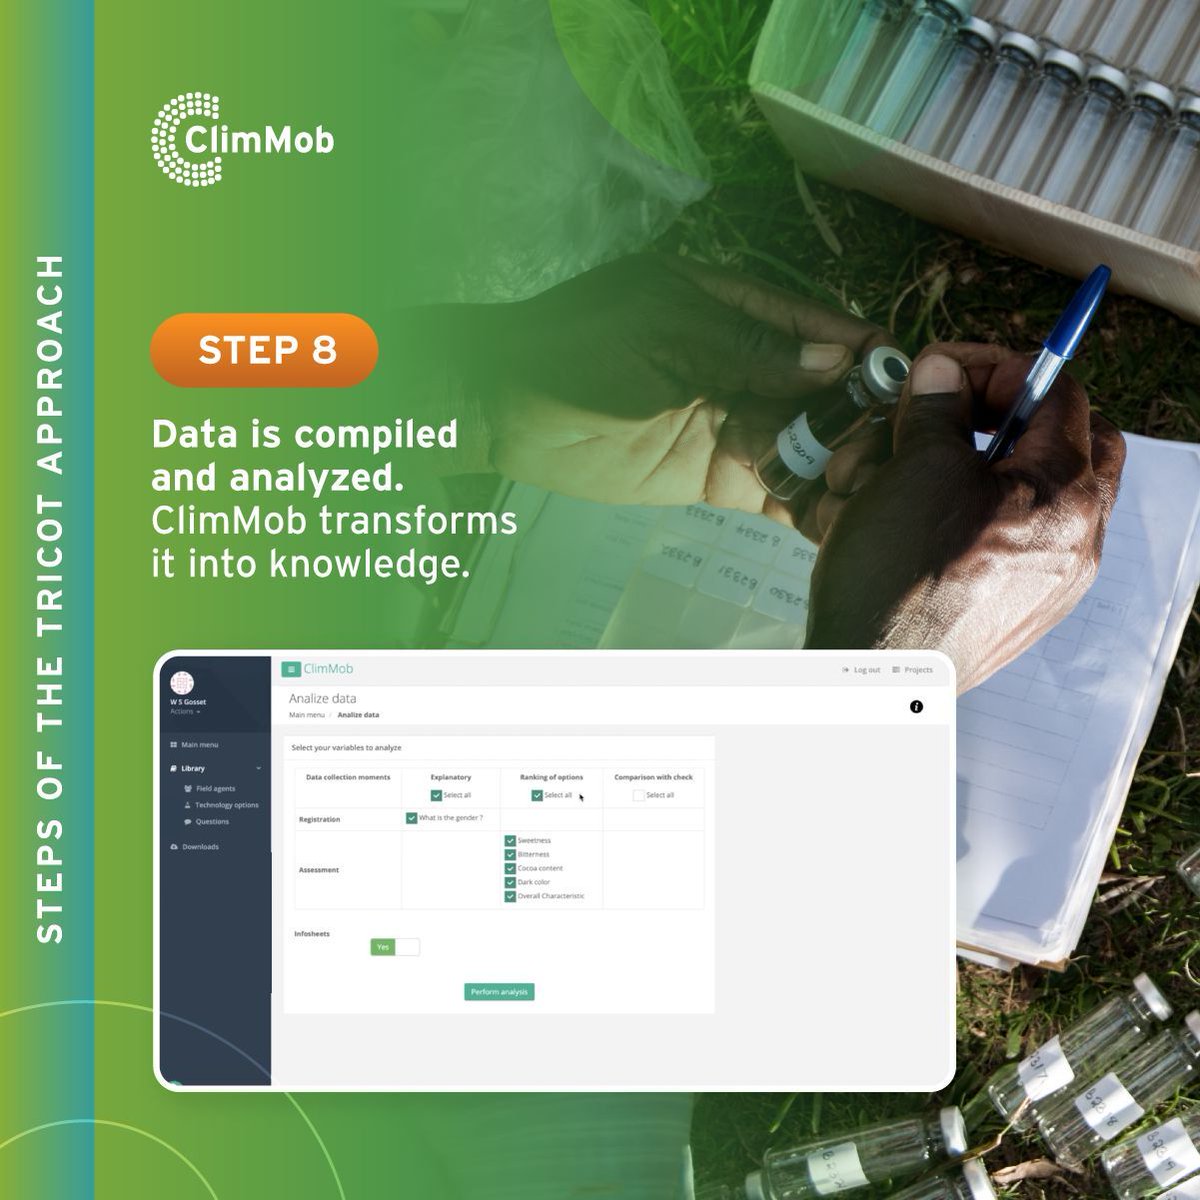 Step 8: Data is compiled and analyzed🌾 Field agents wield technology! Data is compiled on ClimMob, powered by the ODK Collect app. Insights unveiled as ClimMob analyzes, presenting both project-wide and individual participant result sheets. #DataInsights #ClimMobAnalysis